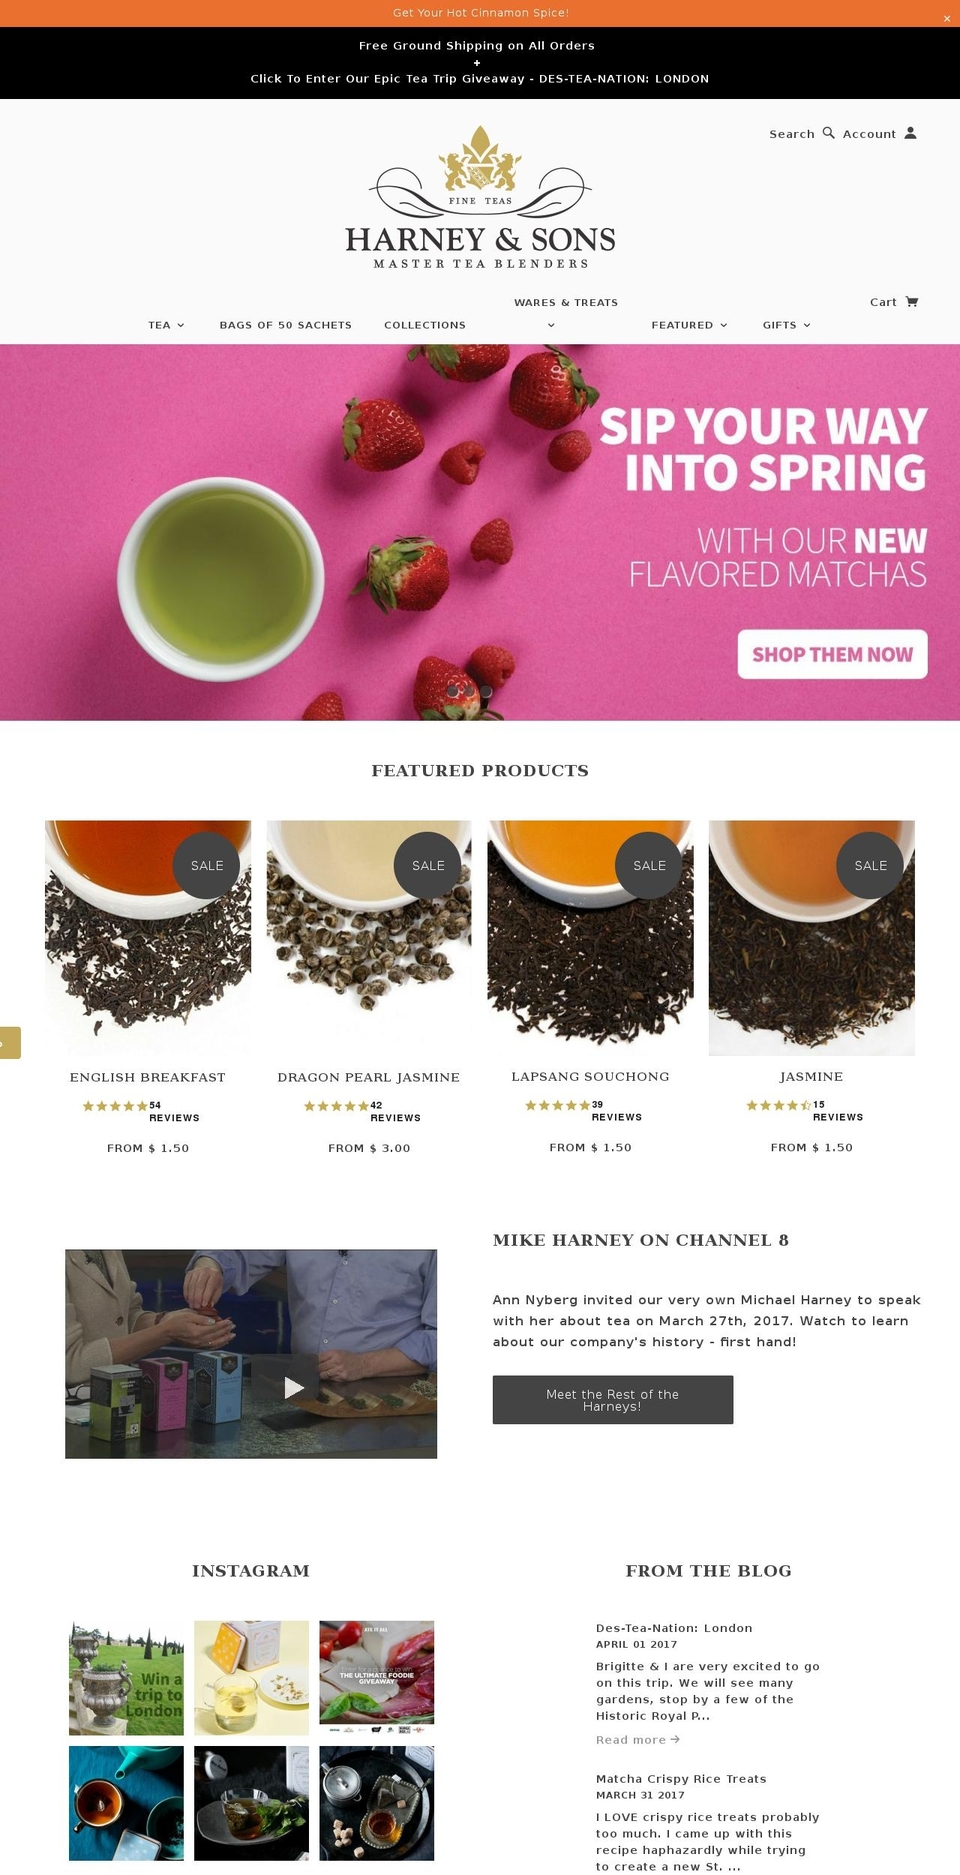 Focal Shopify theme site example harney.com